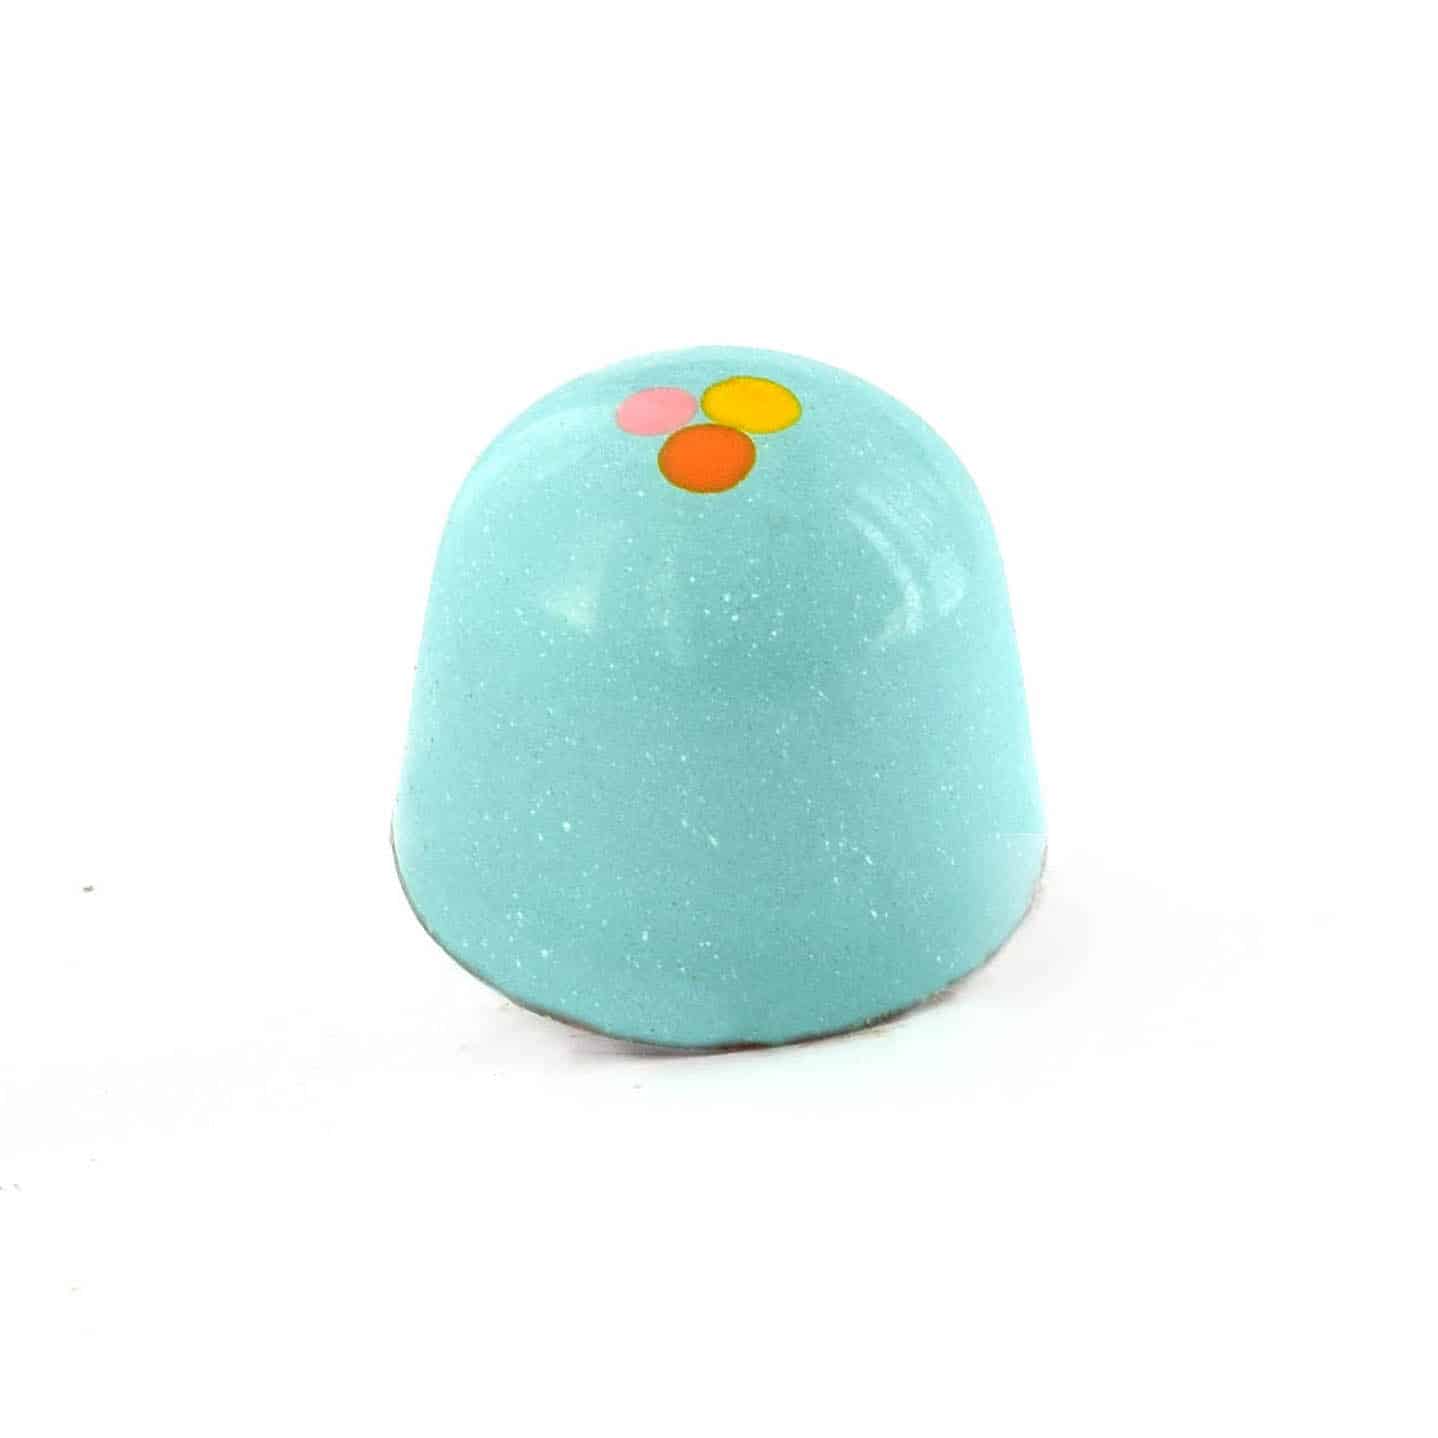 Side view of a blue gourmet bonbon with an orange, pink, and yellow dot; truffle tastes like peanut butter and pretzels